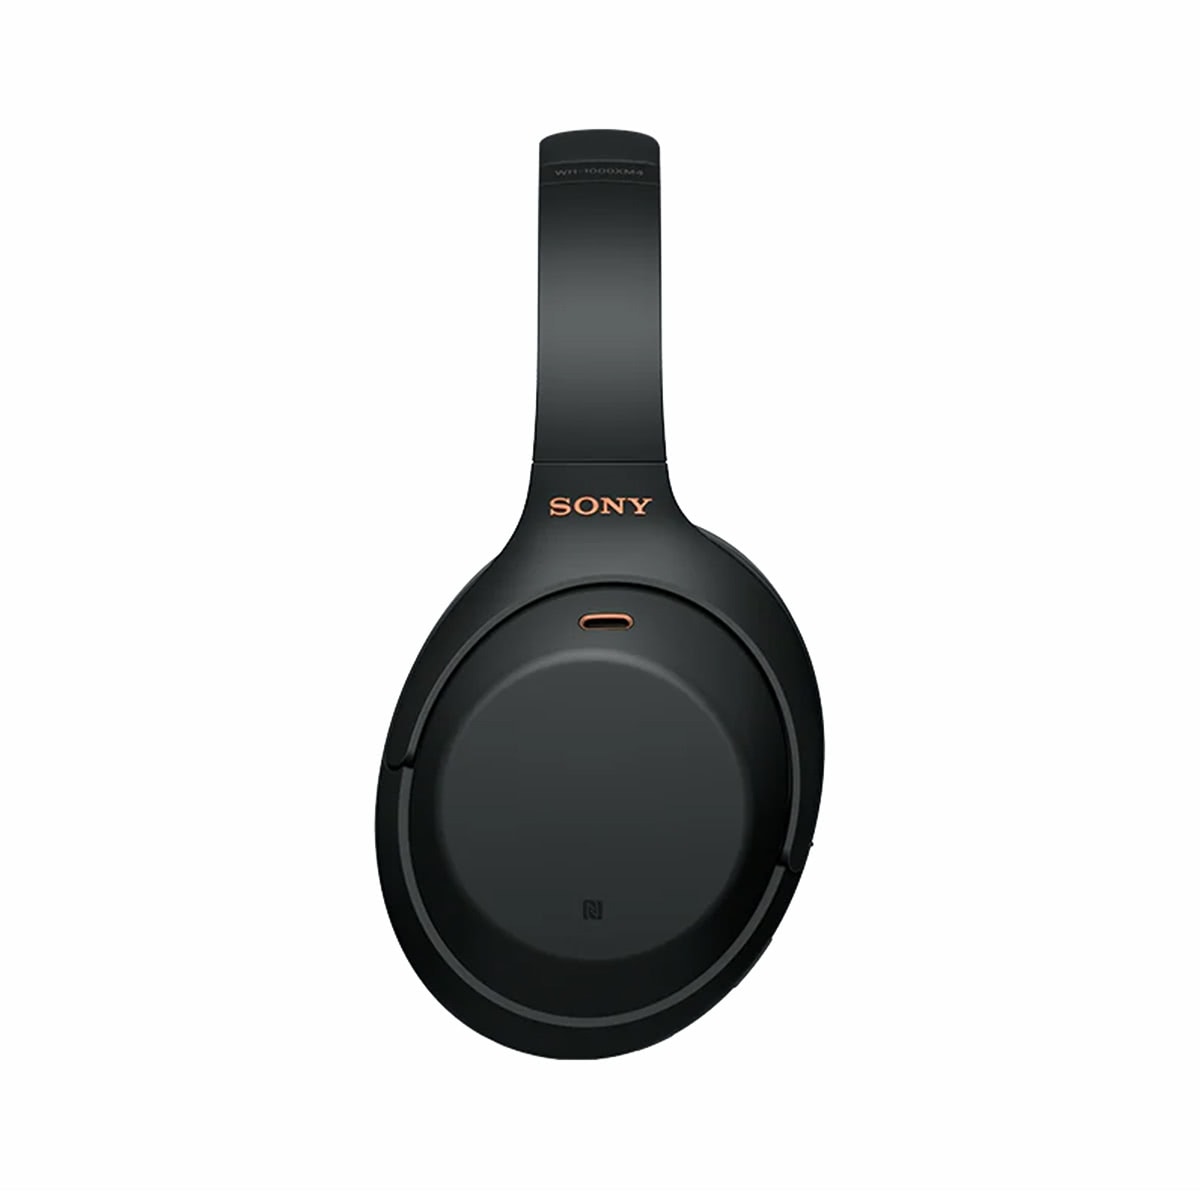 Sony WH-1000XM4 Wireless Noise Canceling Over-the-Ear Headphones with Google Assistant - Black - image 5 of 11